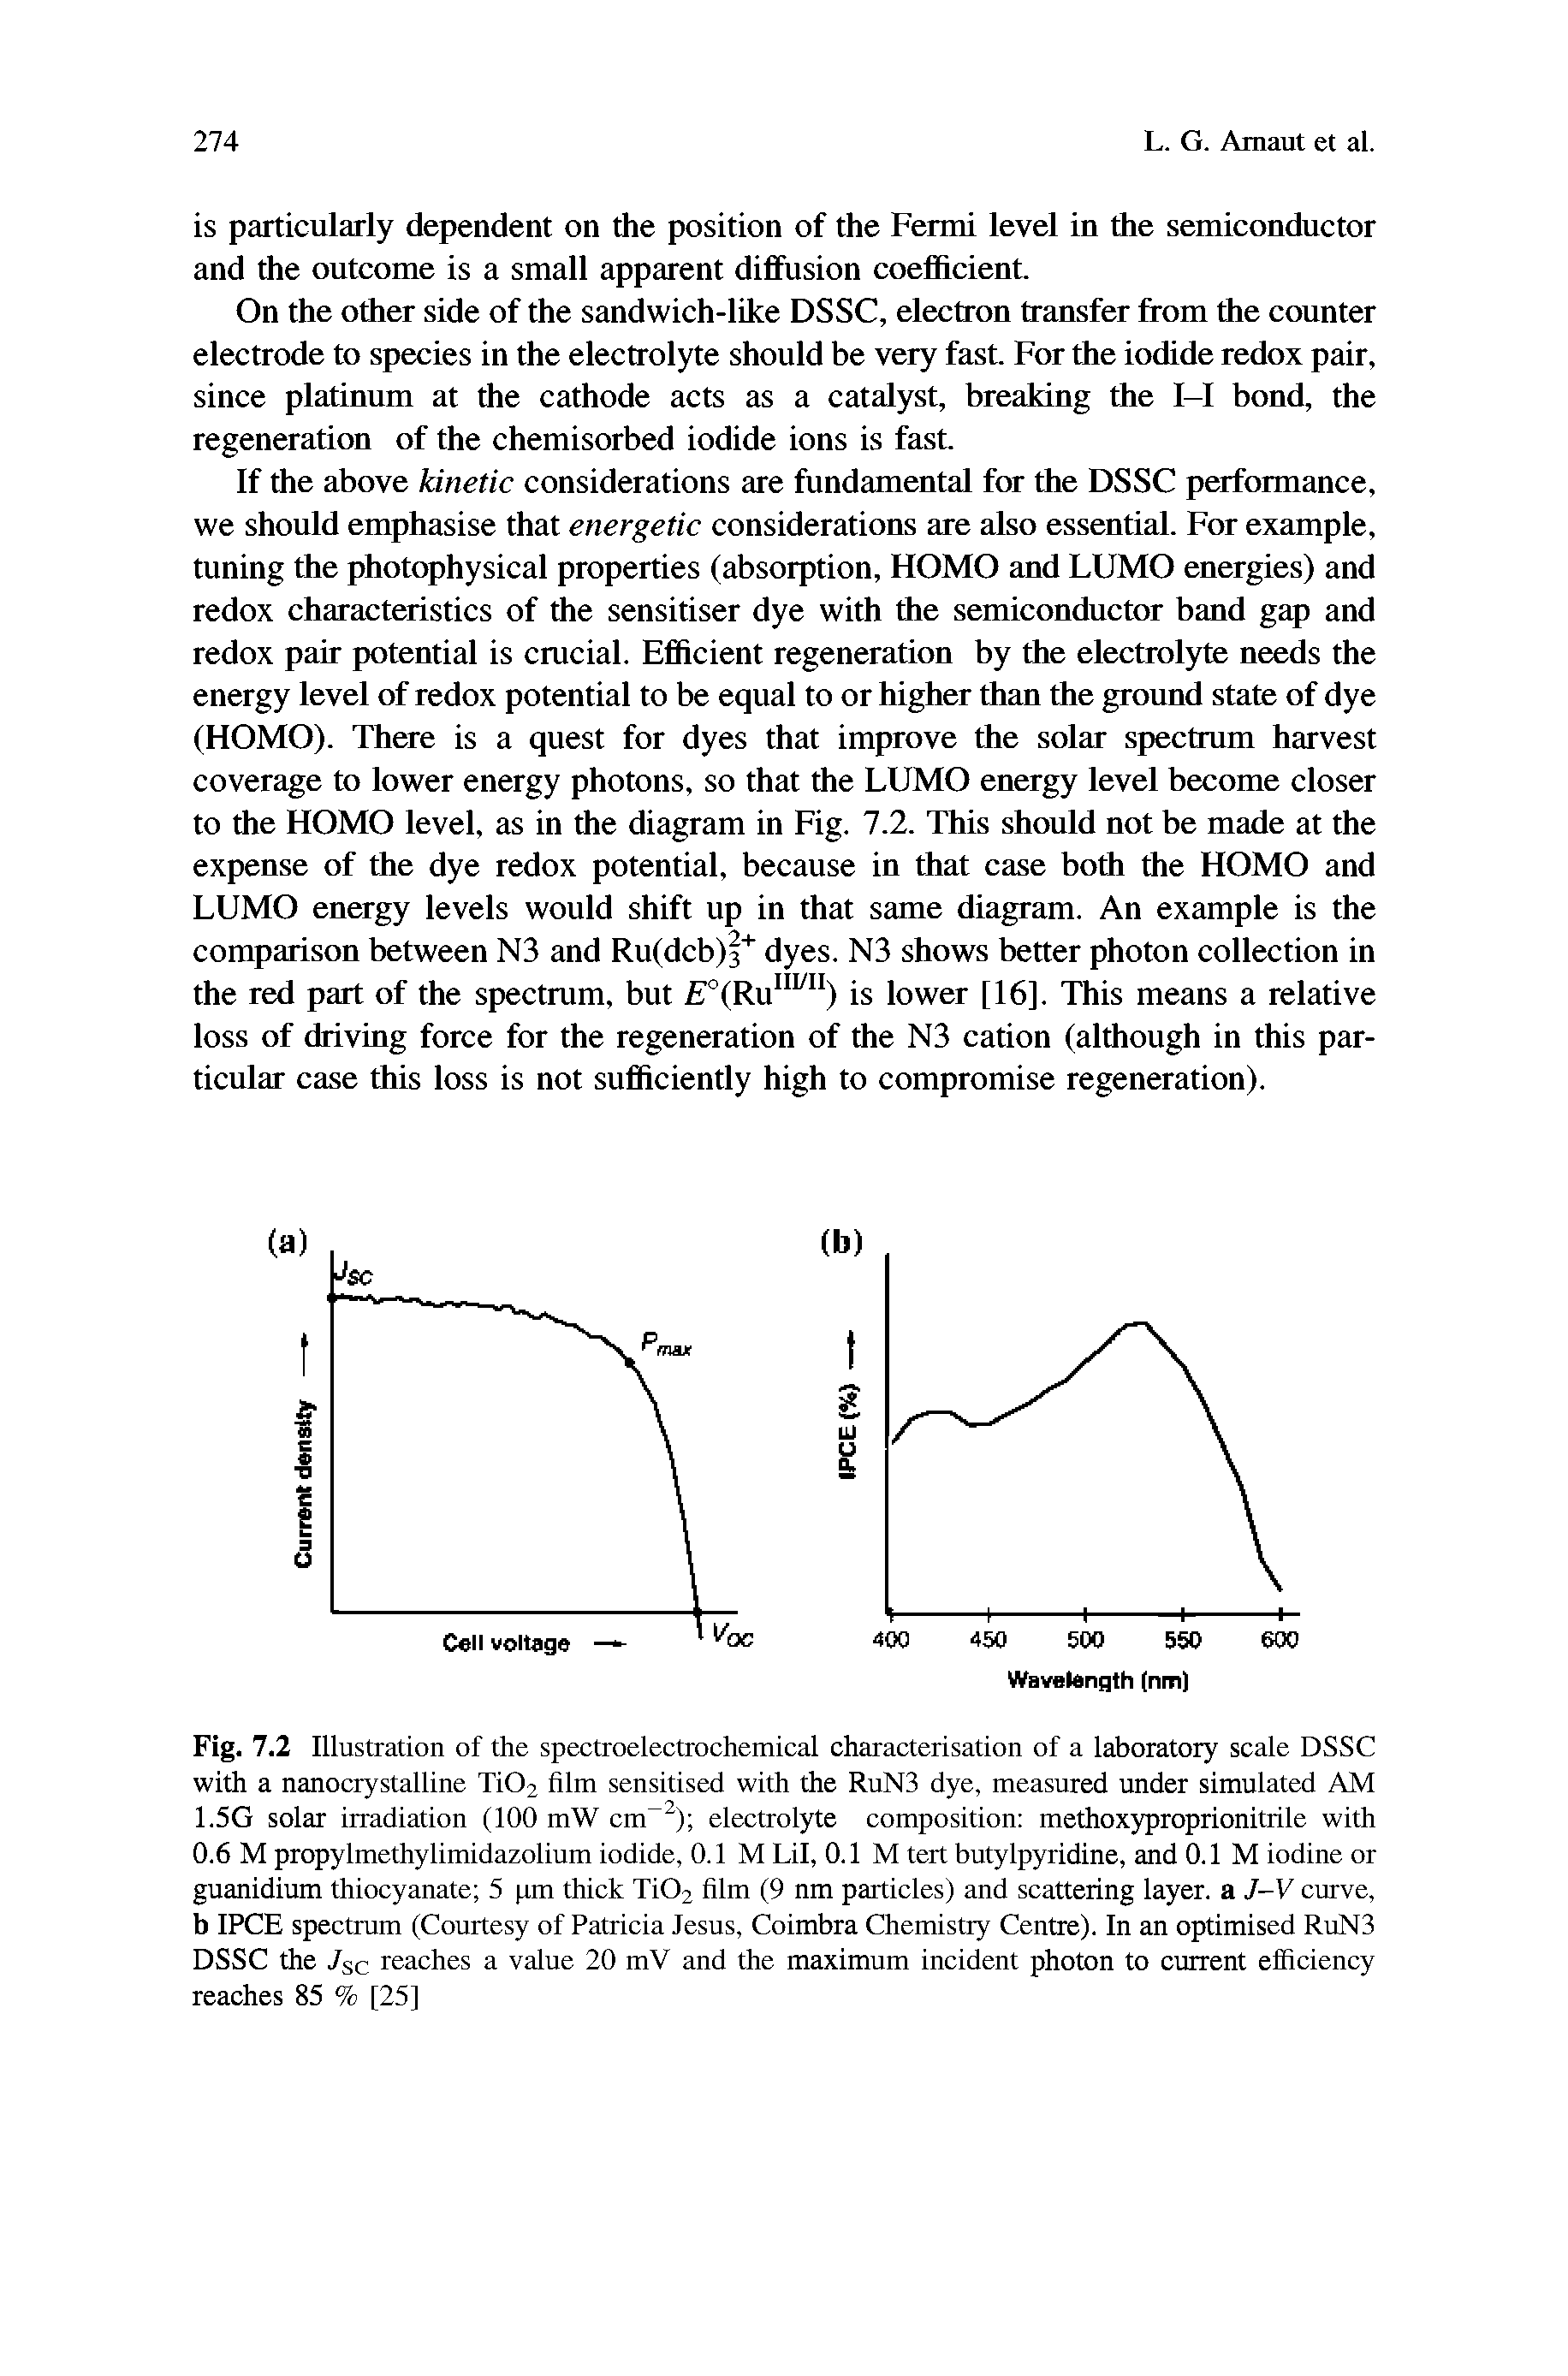 Fig. 7.2 Illustration of the spectroelectrochemical characterisation of a laboratory scale DSSC with a nanocrystalline Ti02 film sensitised with the RuN3 dye, measured under simulated AM 1.5G solar irradiation (100 mW cm ) electrolyte composition methoxyproprionitrile with 0.6 M propylmethylimidazolium iodide, 0.1 M Lil, 0.1 M tert butylpyridine, and 0.1 M iodine or guanidium thiocyanate 5 pm thick Ti02 film (9 nm particles) and scattering layer, a J-V curve, b IPCE spectrum (Courtesy of Patricia Jesus, Coimbra Chemistry Centre). In an optimised RuN3 DSSC the /sc reaches a value 20 mV and the maximum incident photon to current efficiency reaches 85 % [25]...